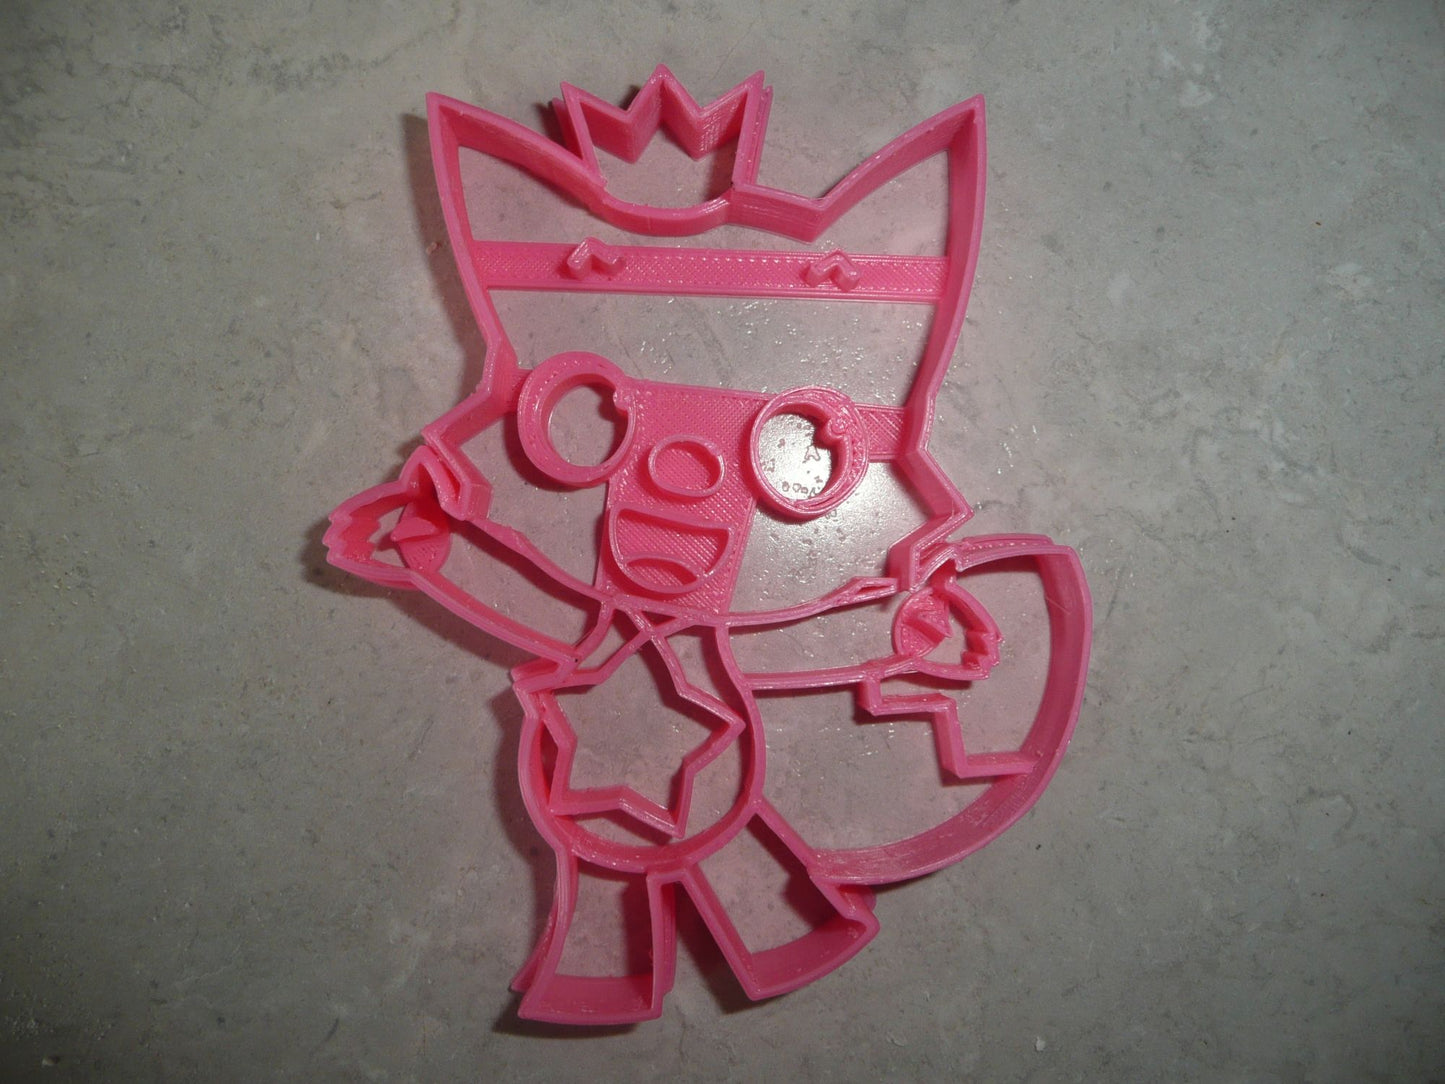 6x Pinkfong Pink Fox With Crown Fondant Cutter Cupcake Topper 1.75 Inch FD3517